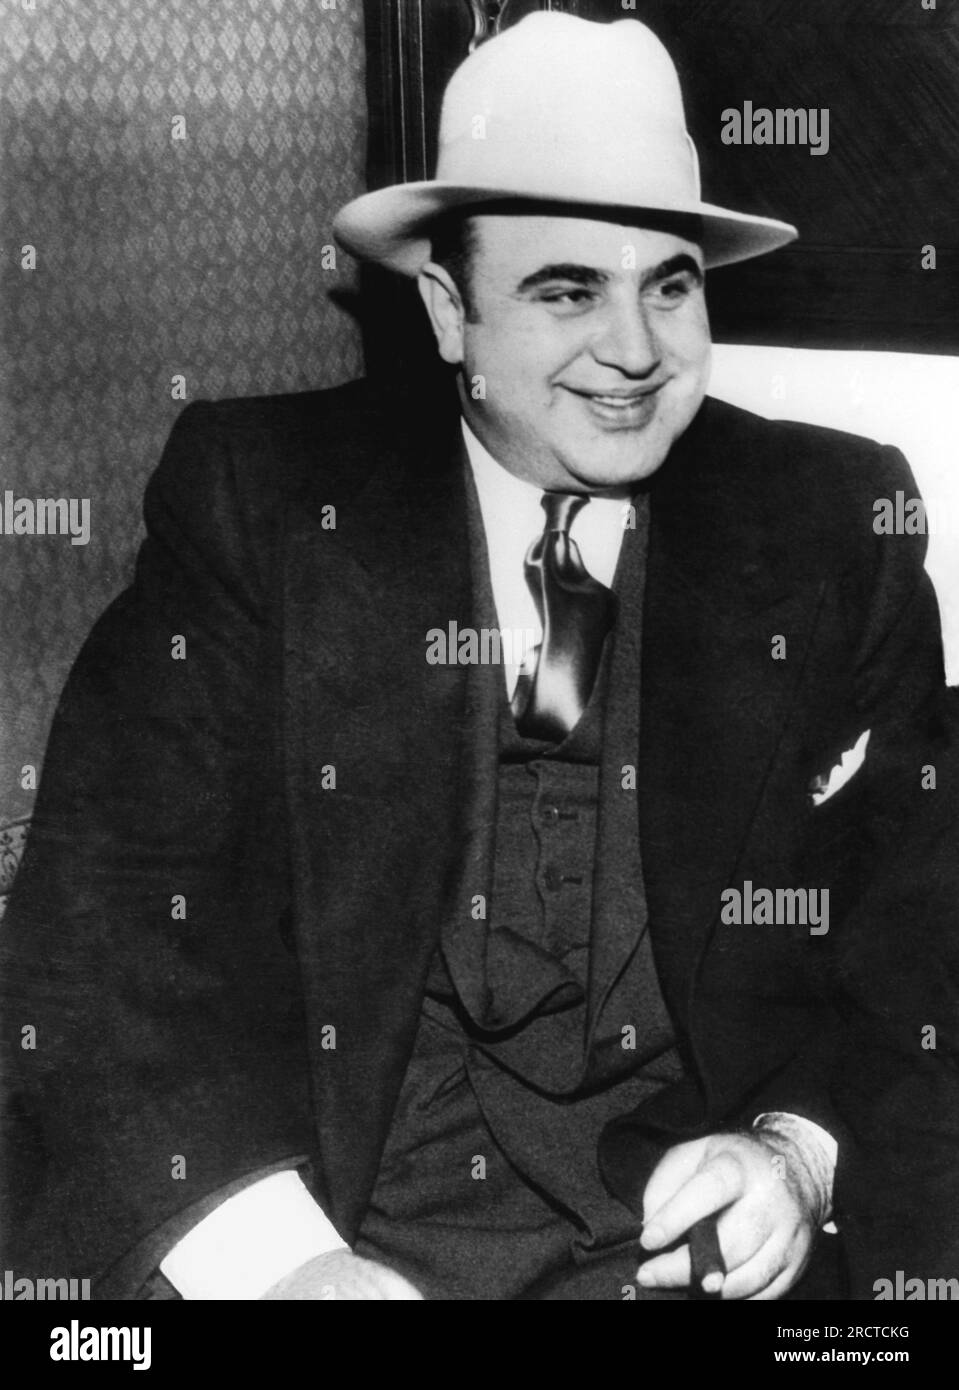 Chicago, Illinois:  January 1, 1930. A portrait of American gangster, Al Capone. Stock Photo